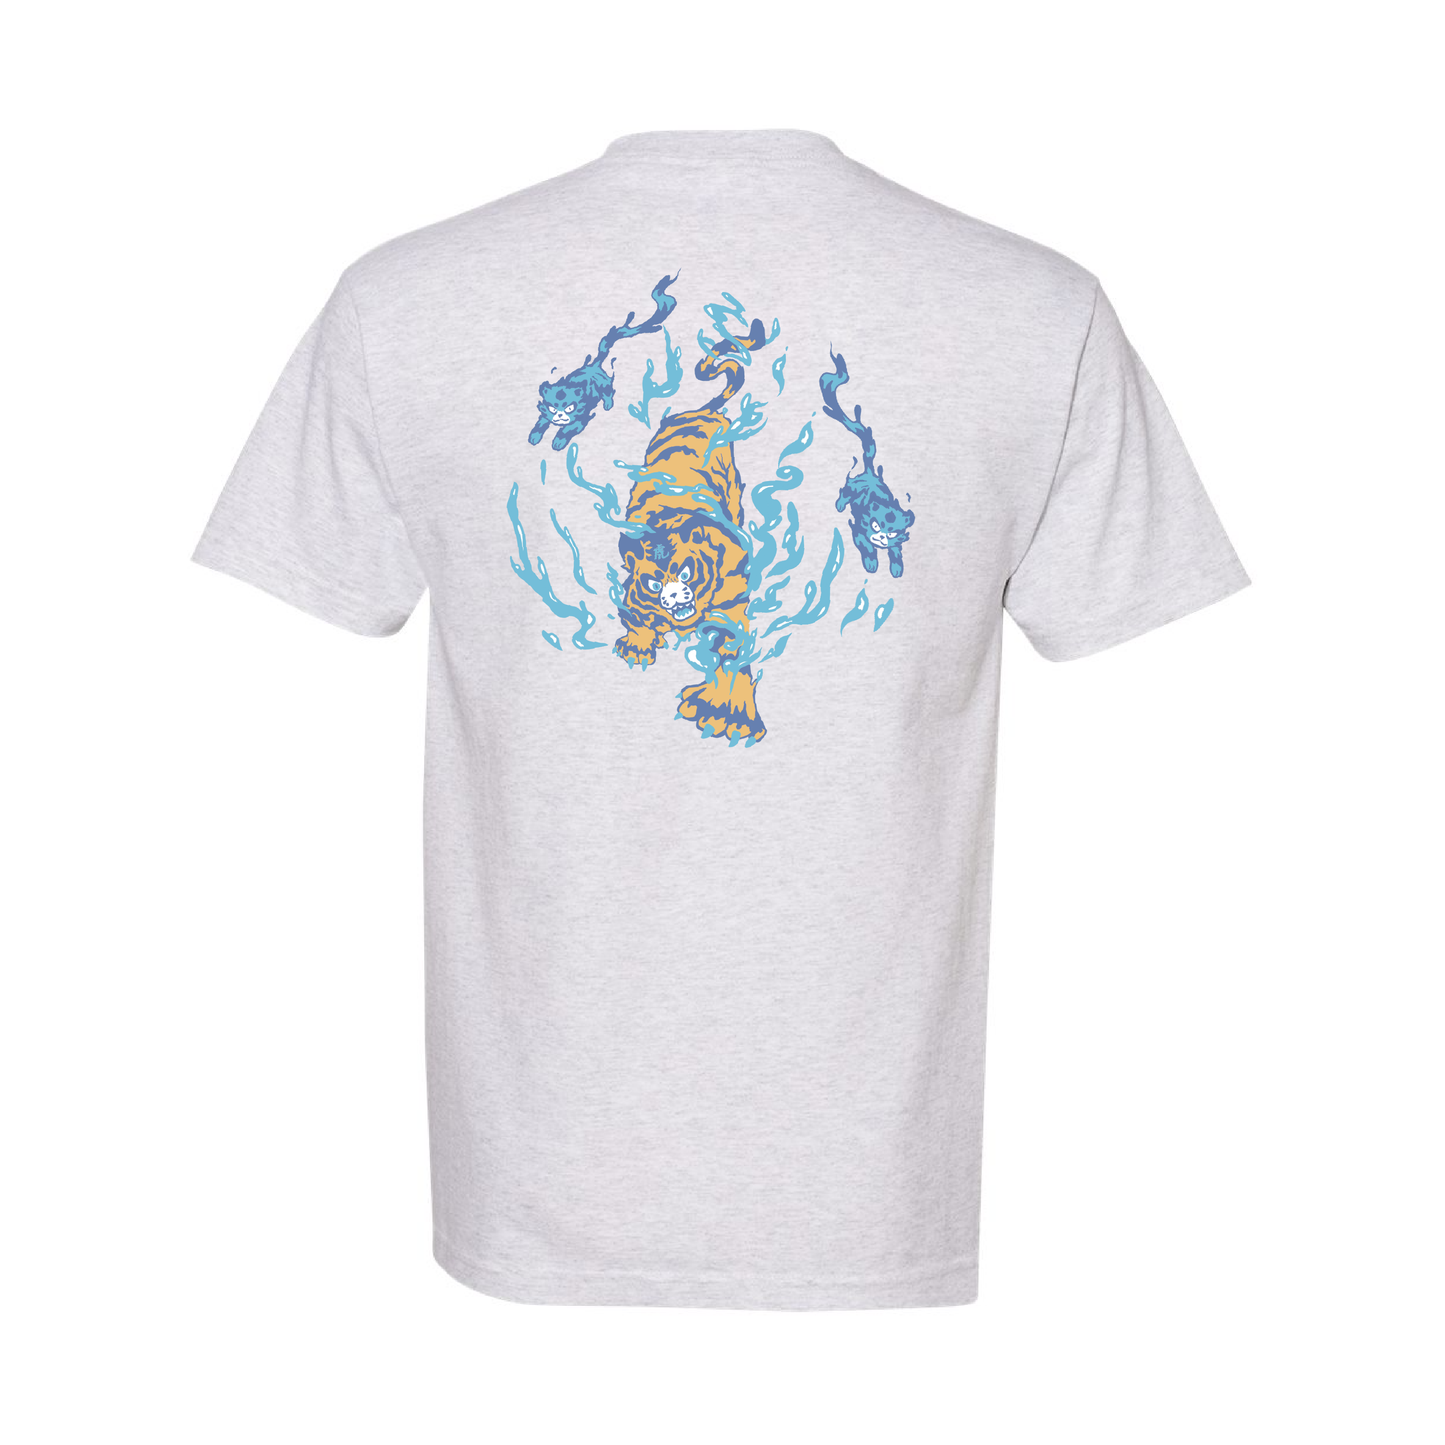 Year of the Water Tiger T-Shirt - Ash White